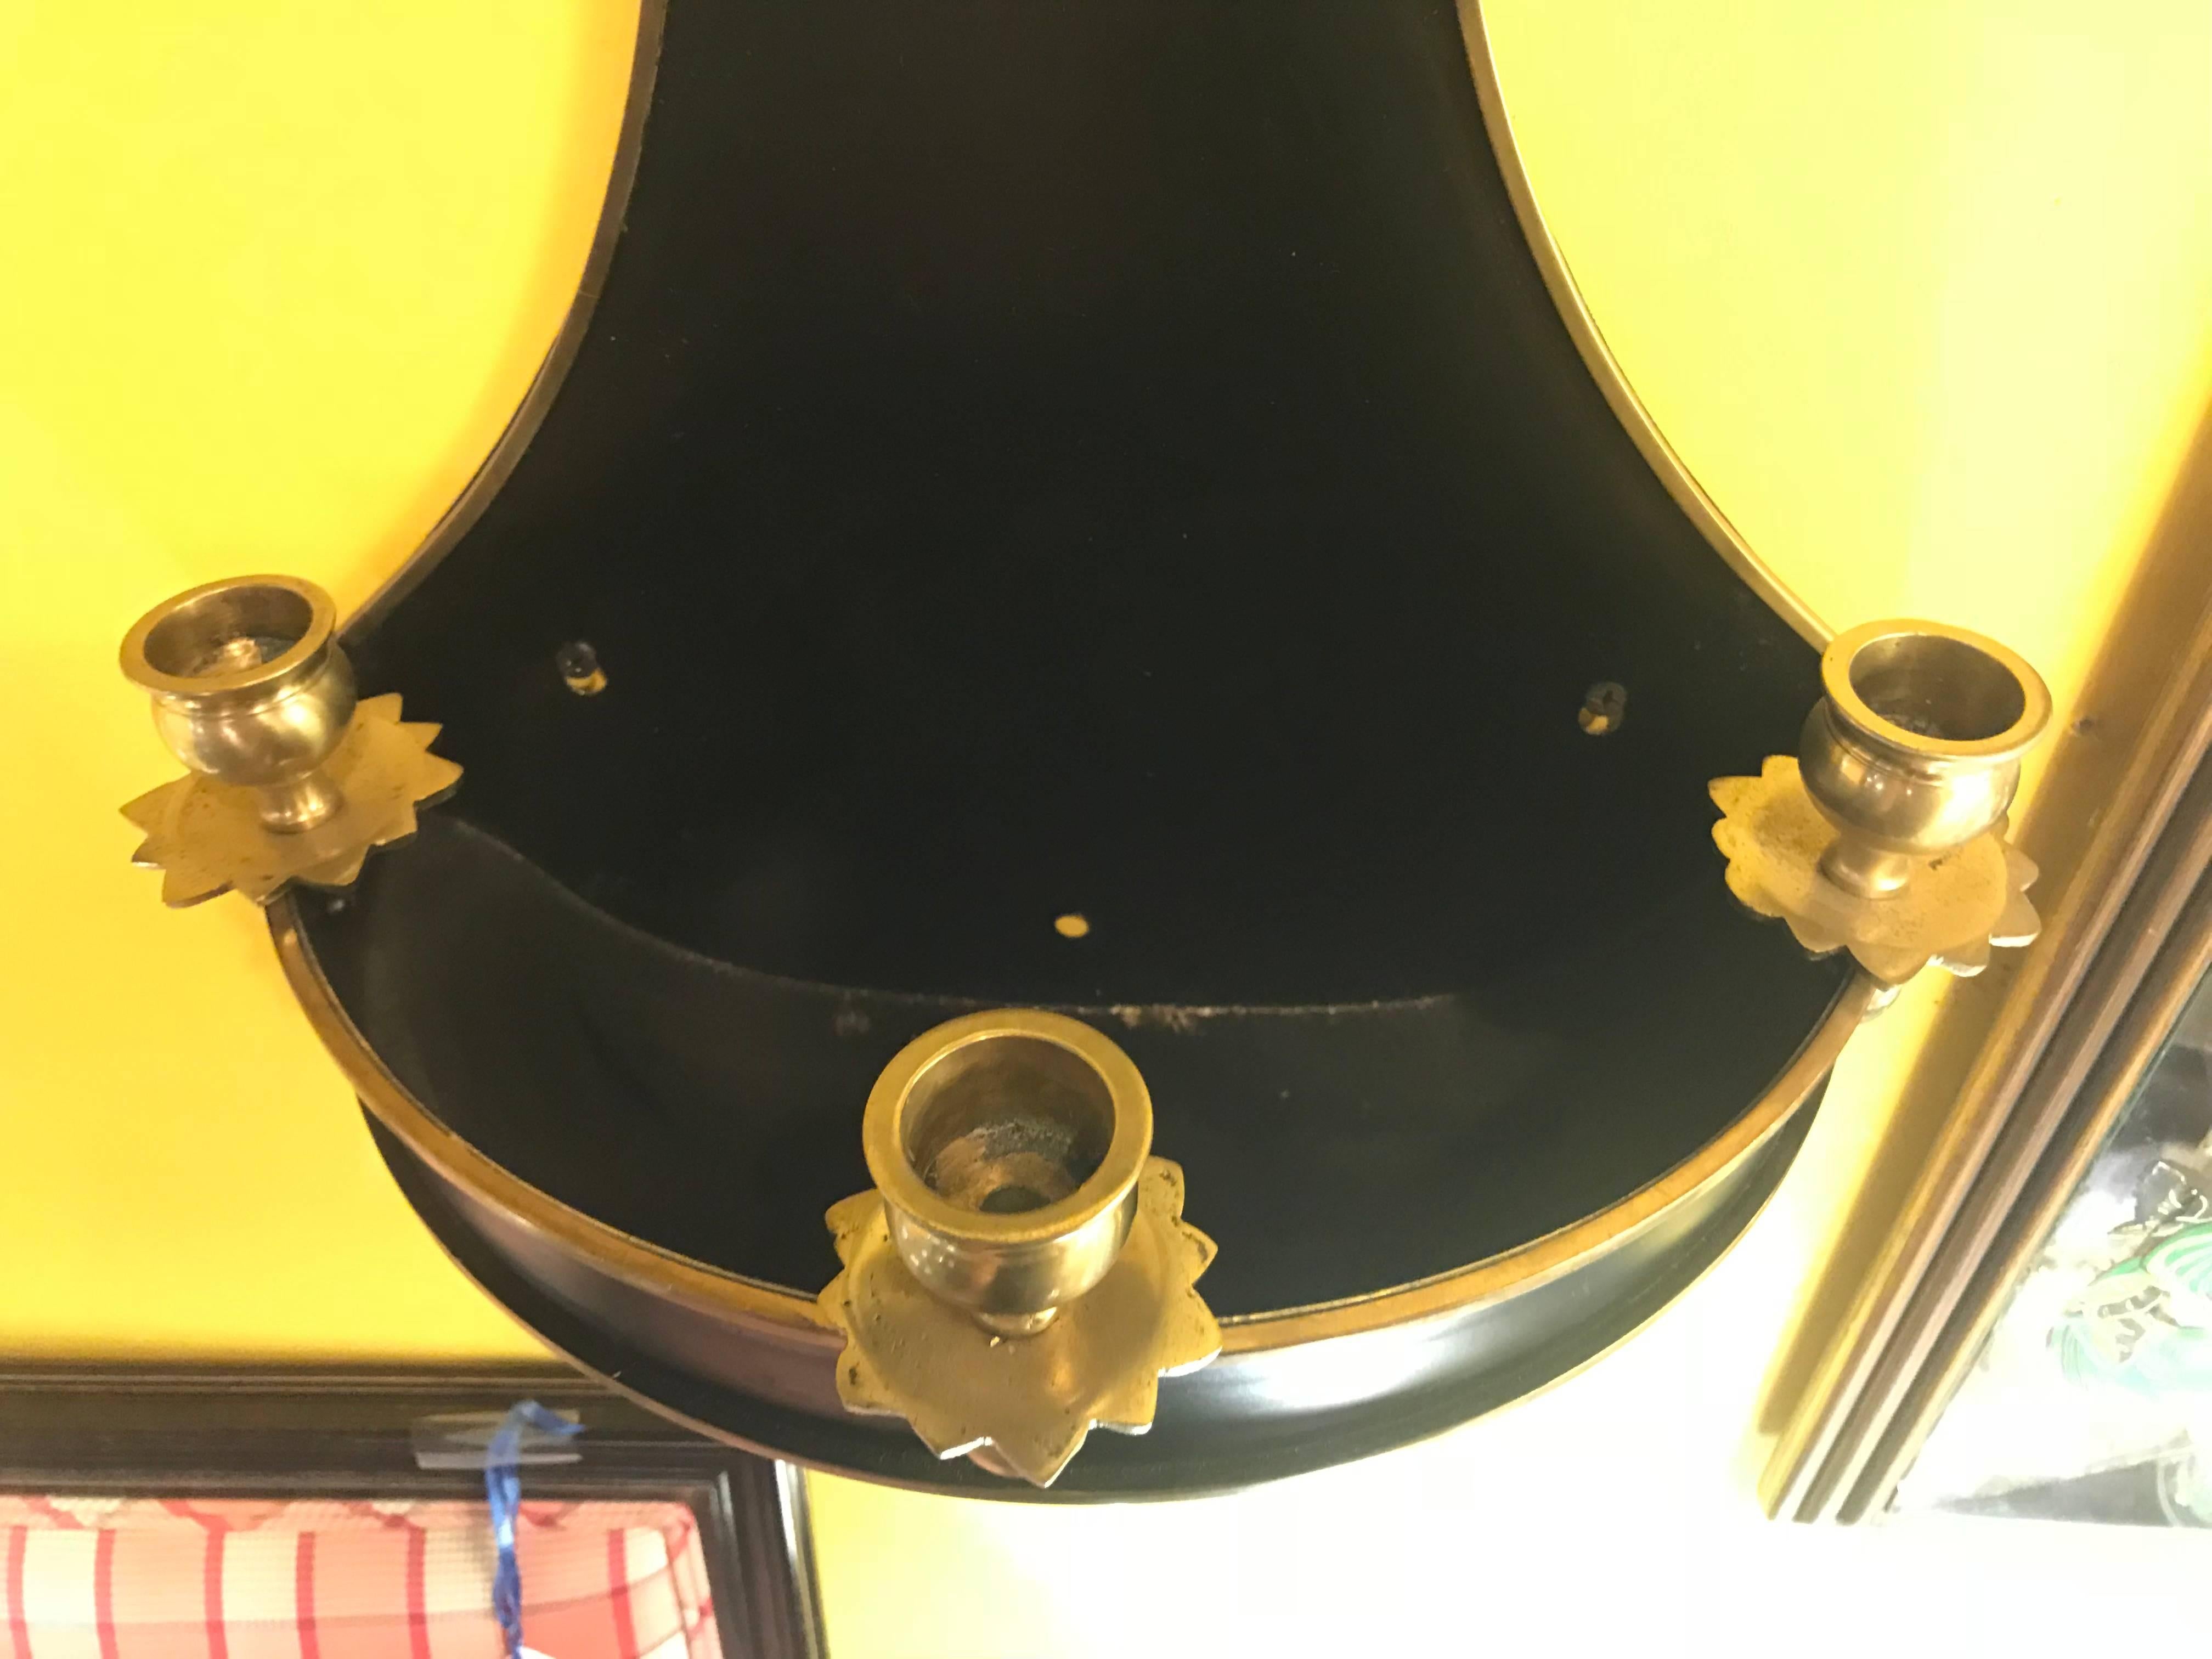 A pair of ebony and brass tear drop wall sconce planters.